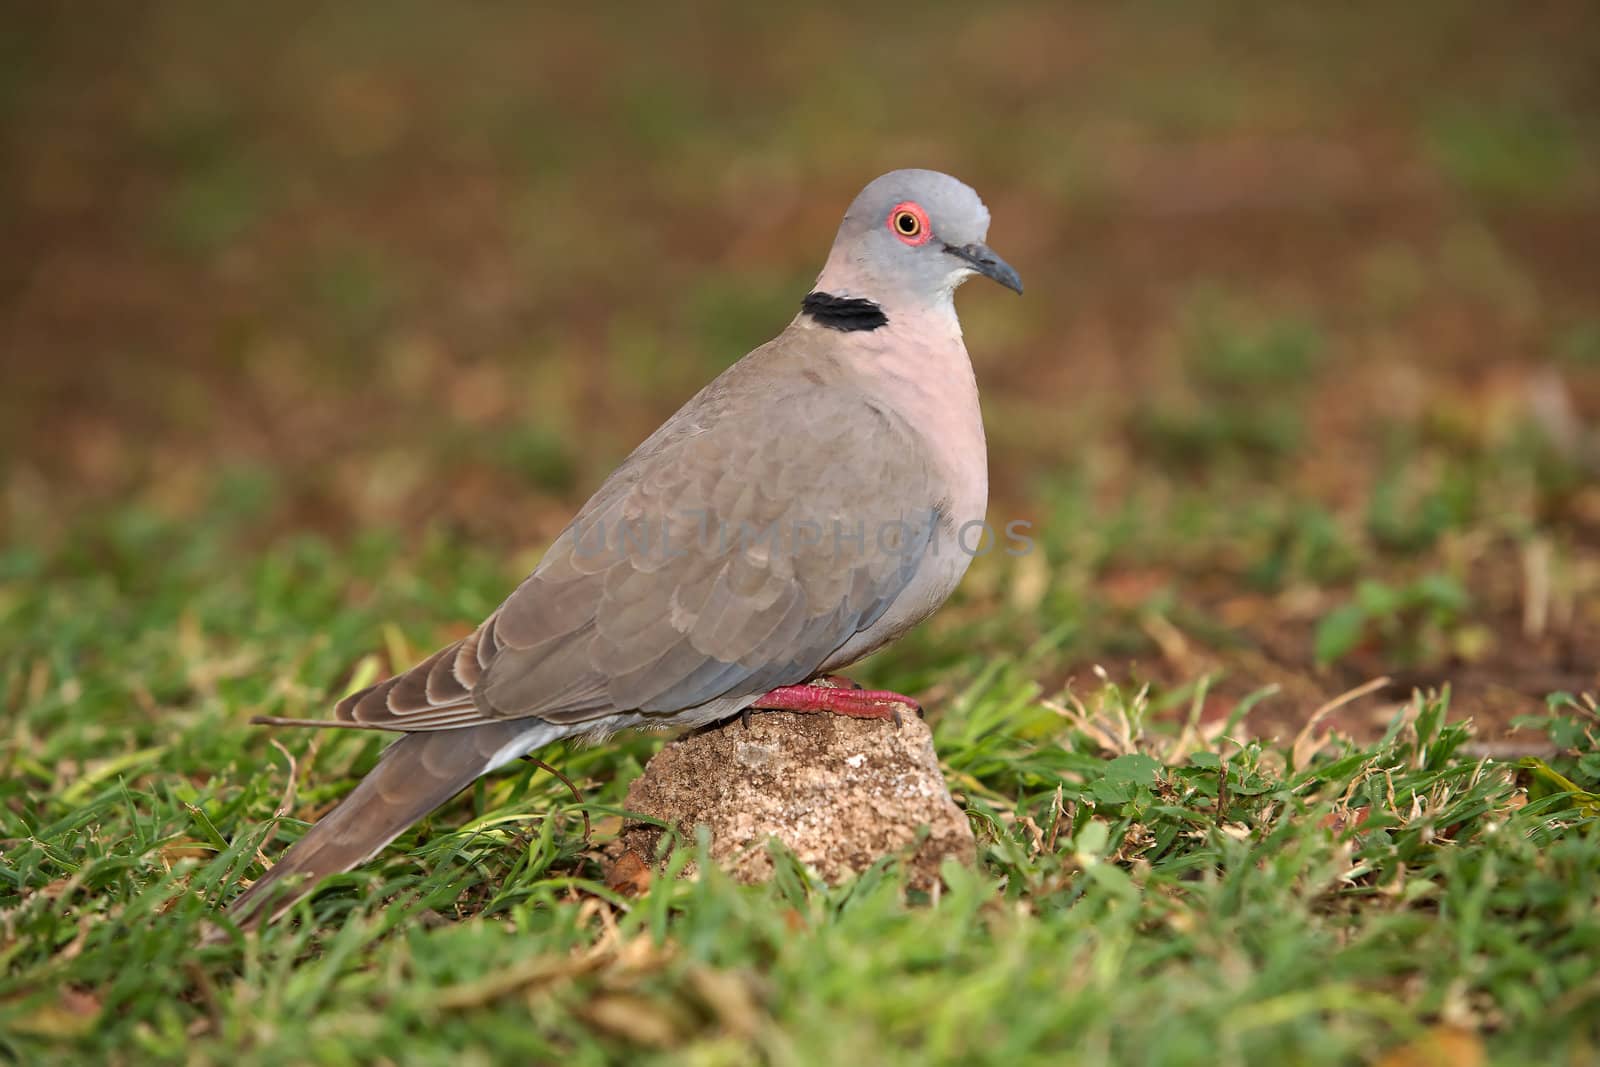 An African Mourning Dove (Streptopelia decipiens) in the Kruger National Park, South Africa.